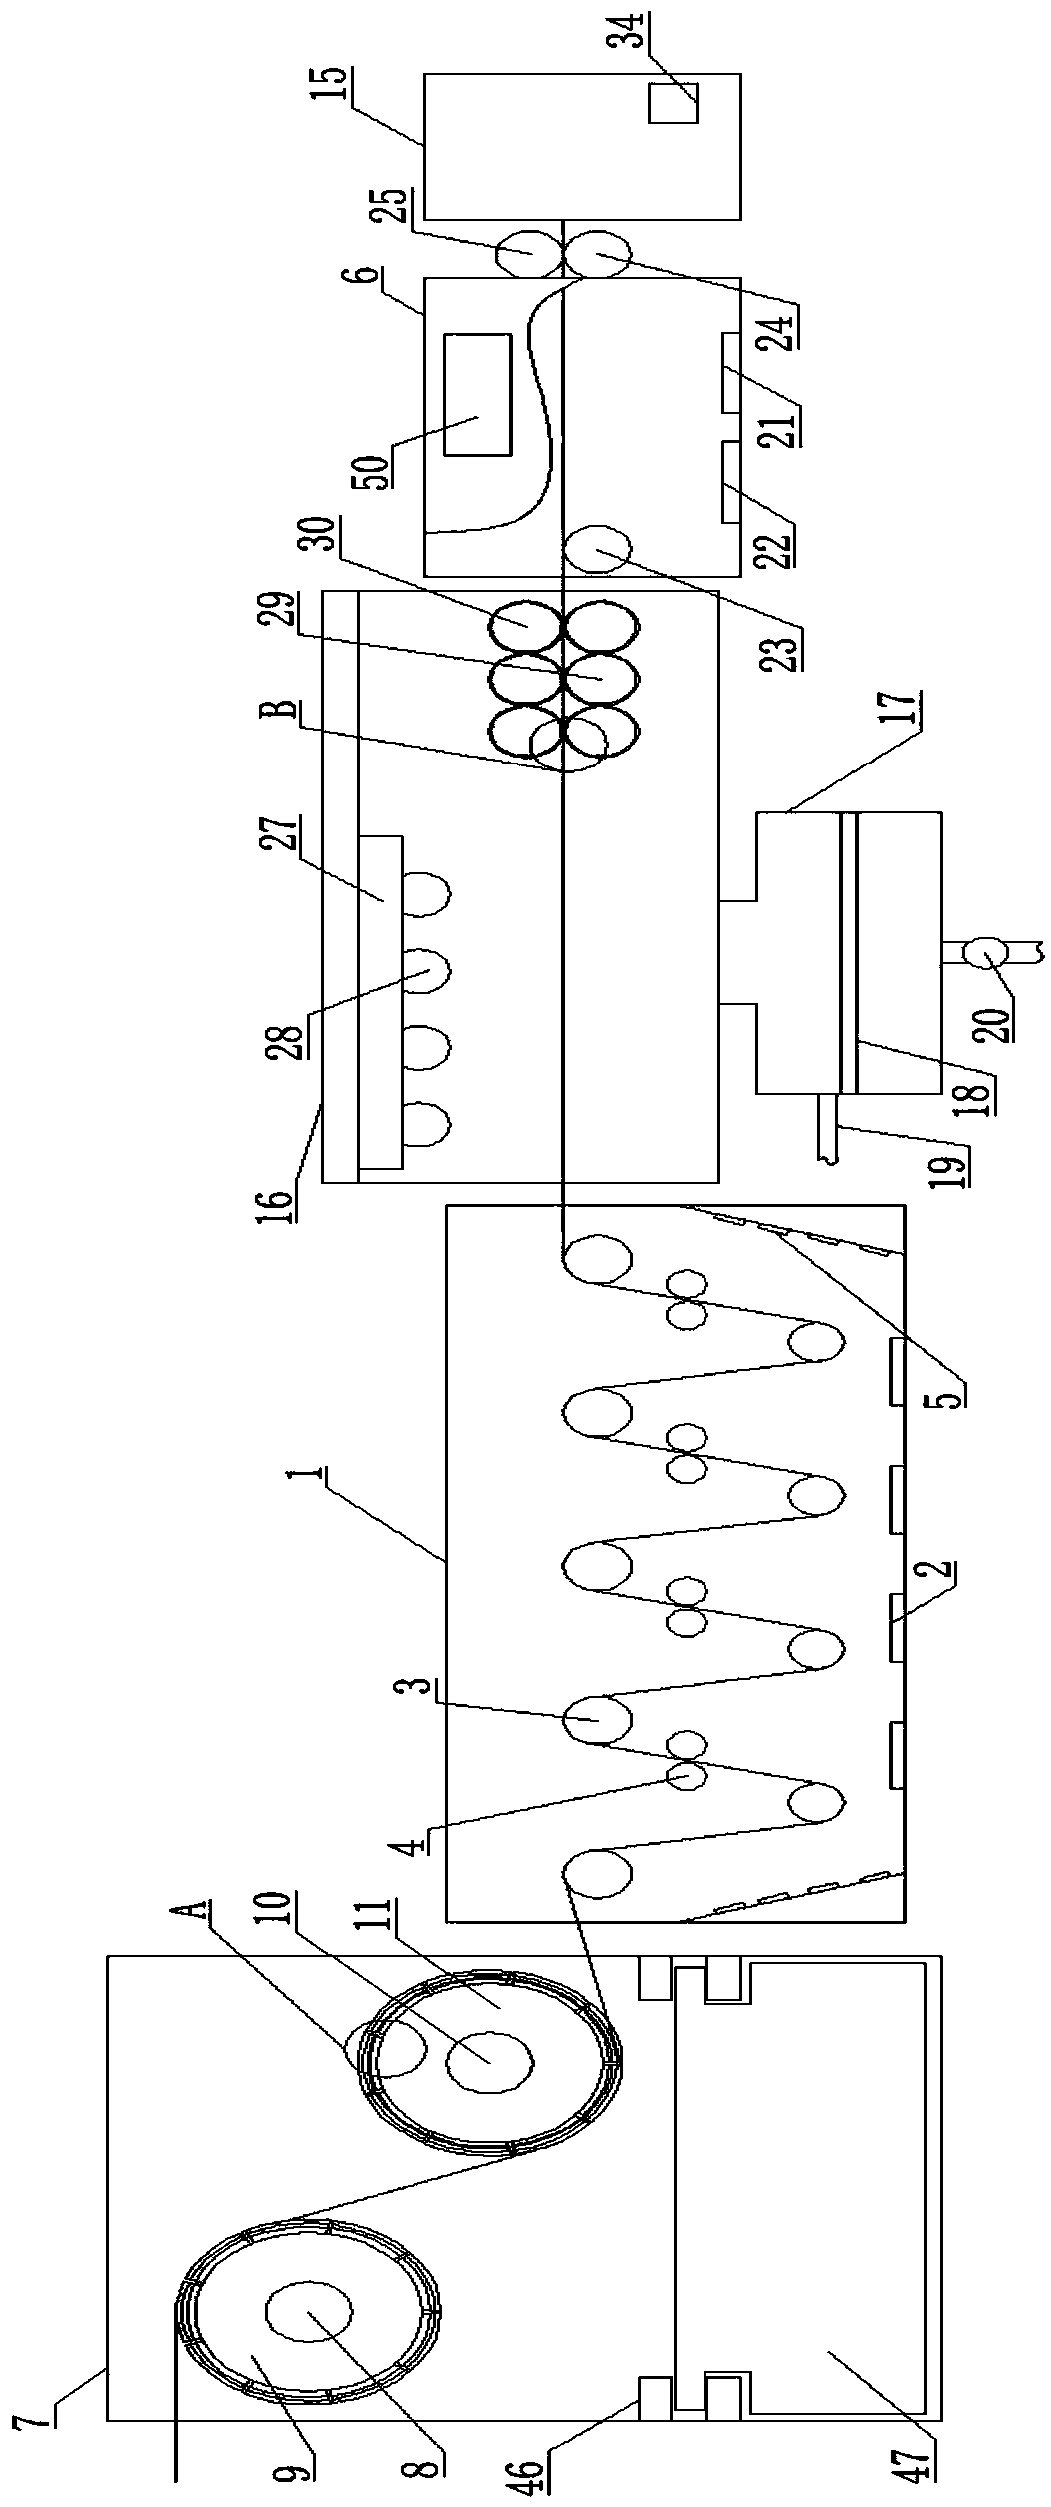 Integrated efficient dyeing and finishing device for textile fabric